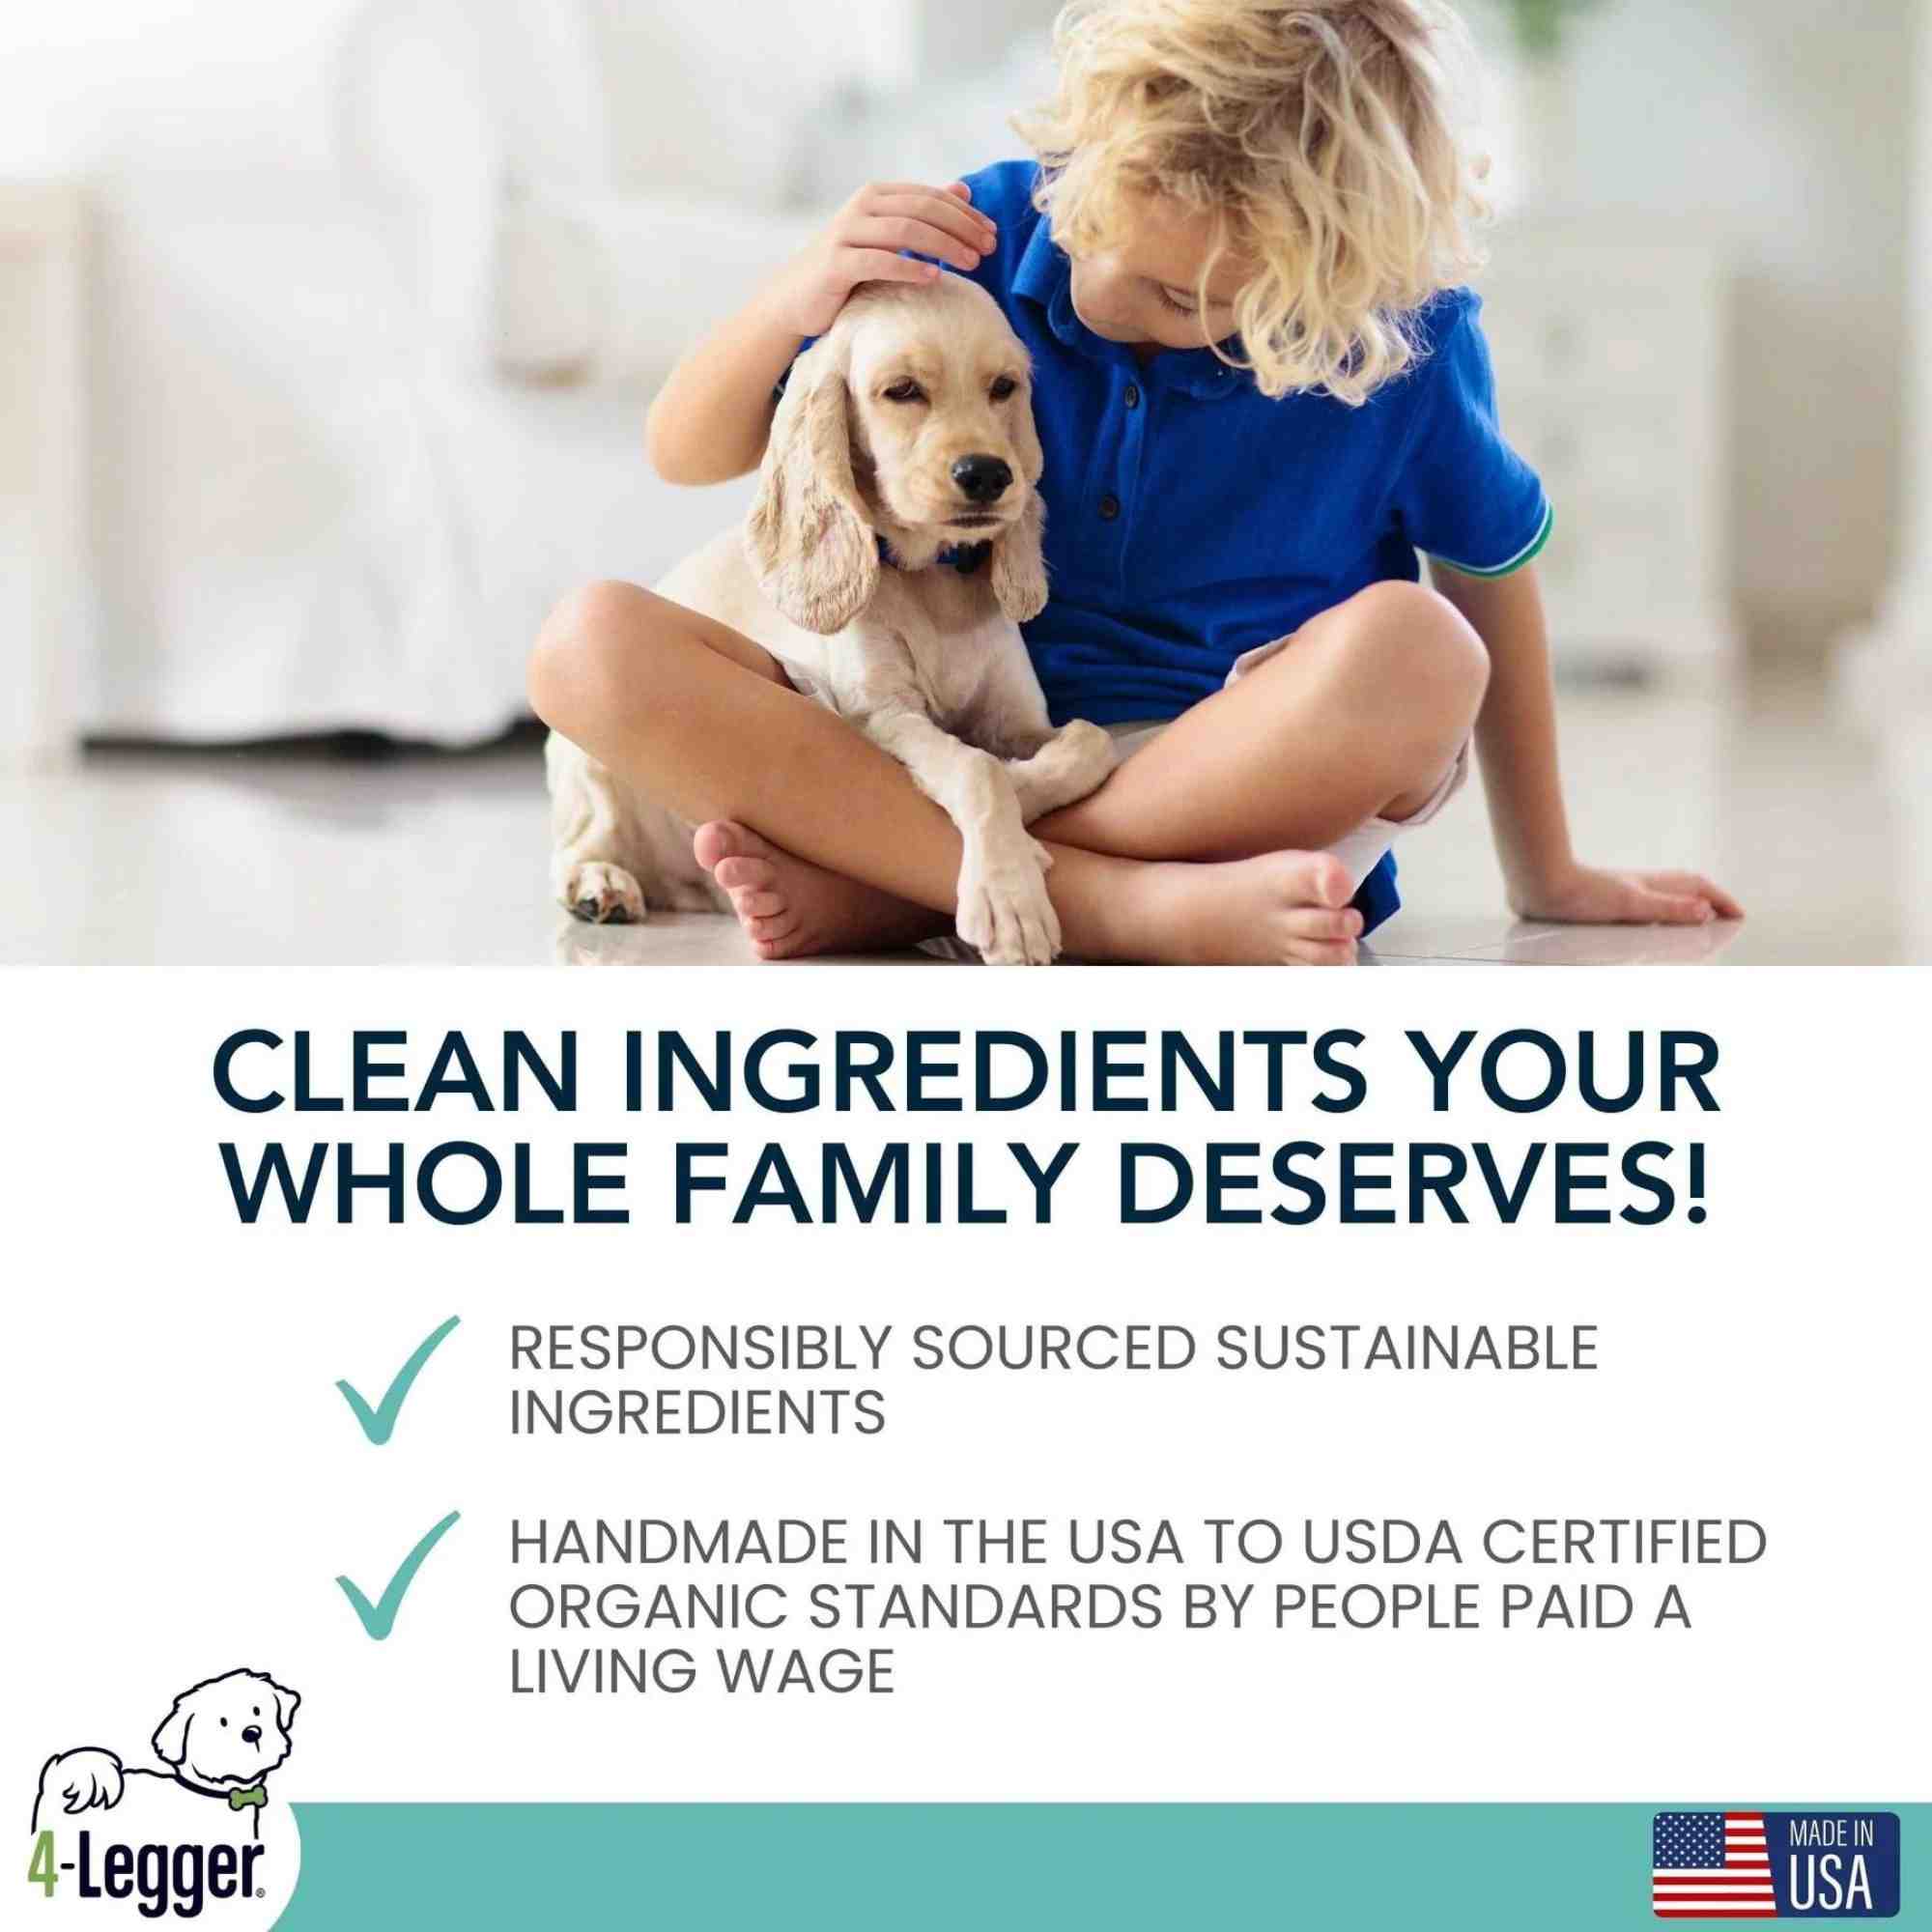 4-legger-usda-certified-organic-dog-shampoo-cooling-organic-tea-tree-oil-dog-shampoo-with-peppermint-clean ingredients for entire family